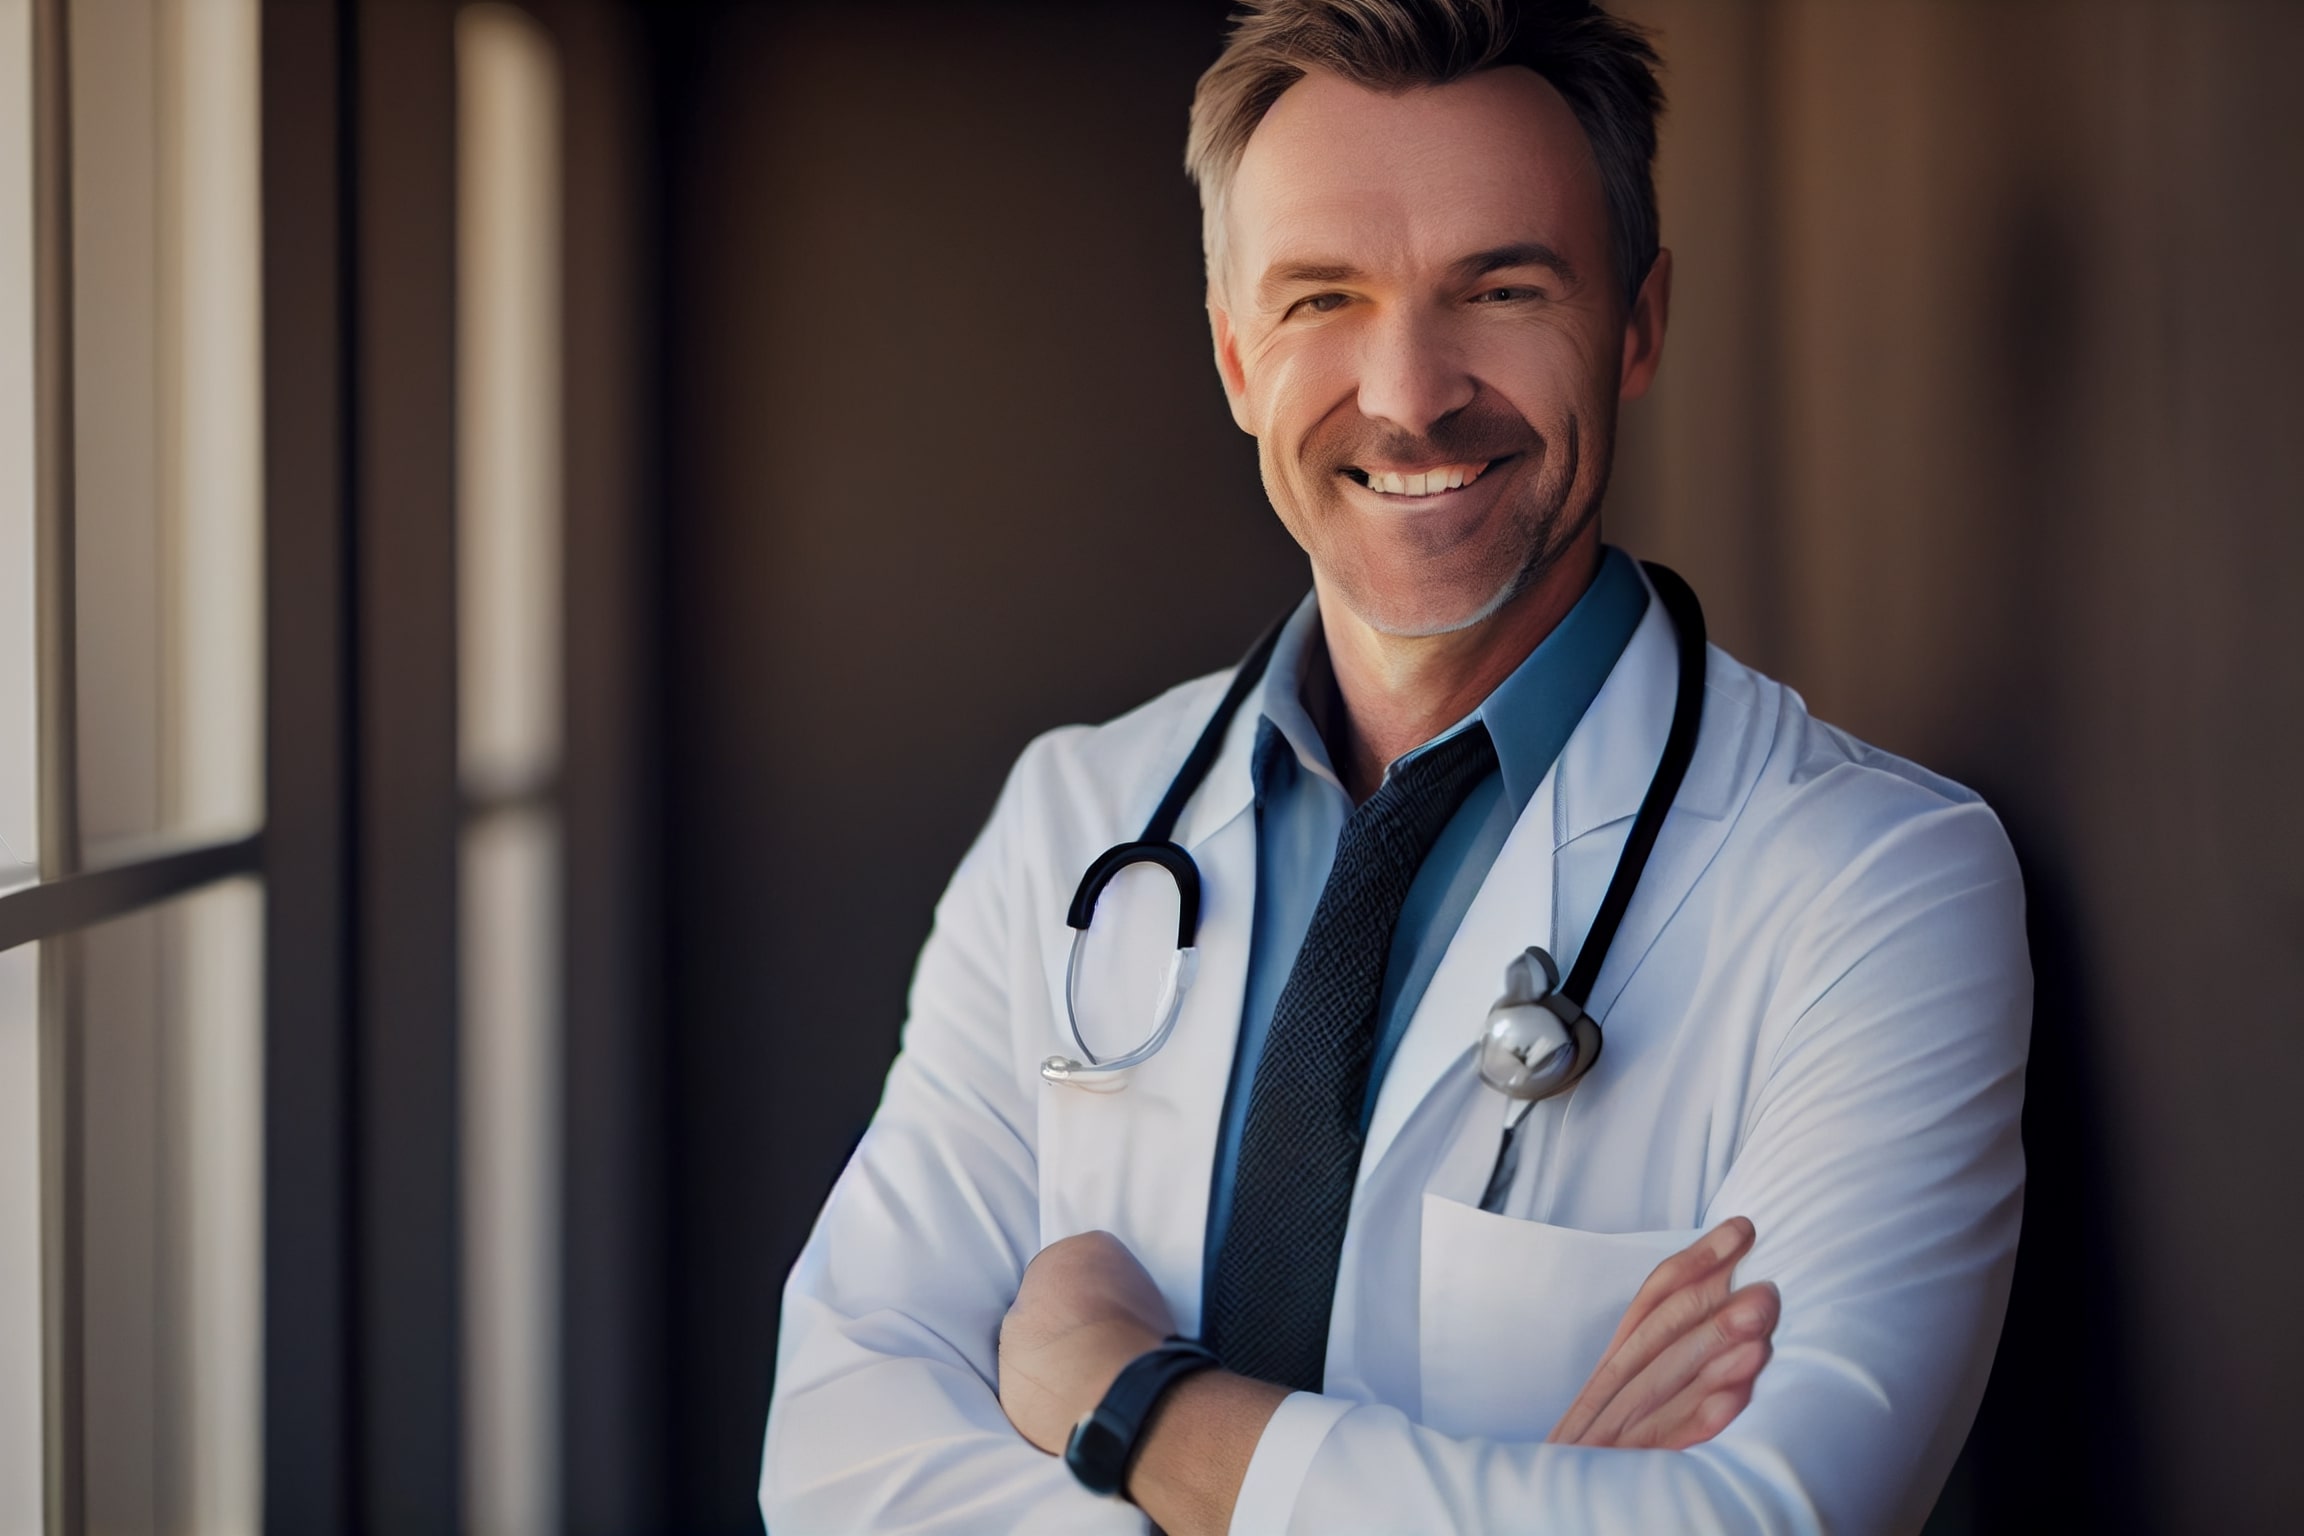 Smiling man with a stethoscope on his neck.